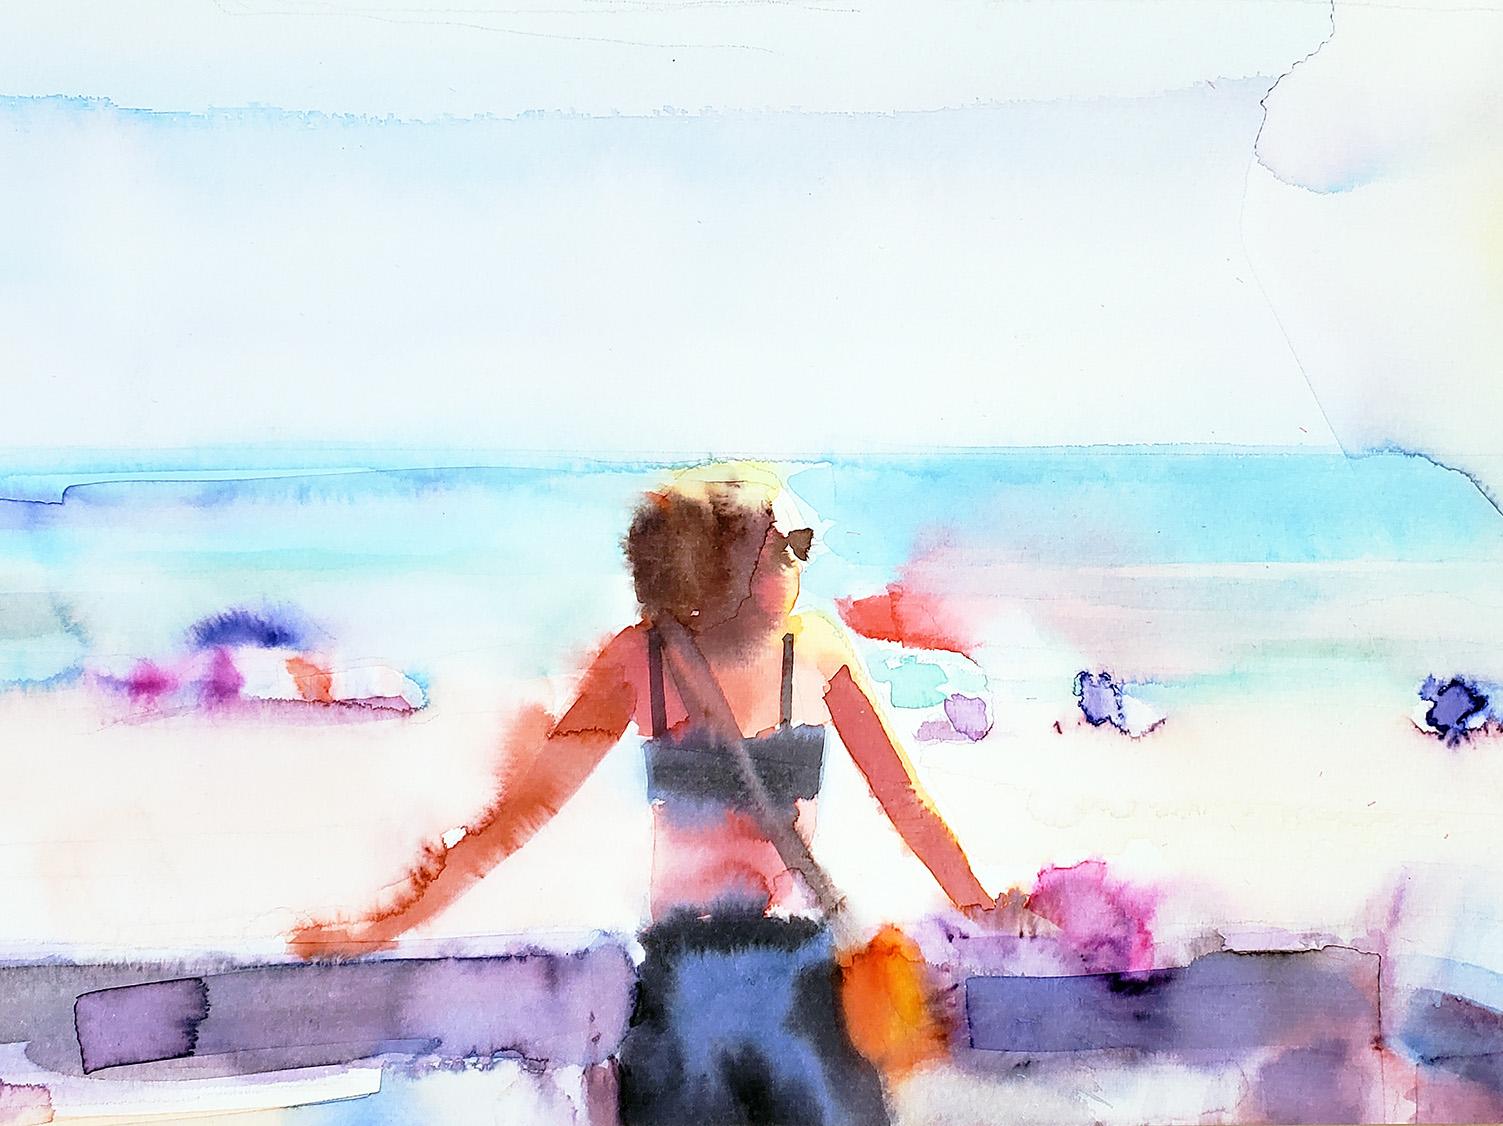  Elena Chestnykh Figurative Art - "One Summer Day" Figurative Painting, Watercolor, Beach, Landscape, Framed